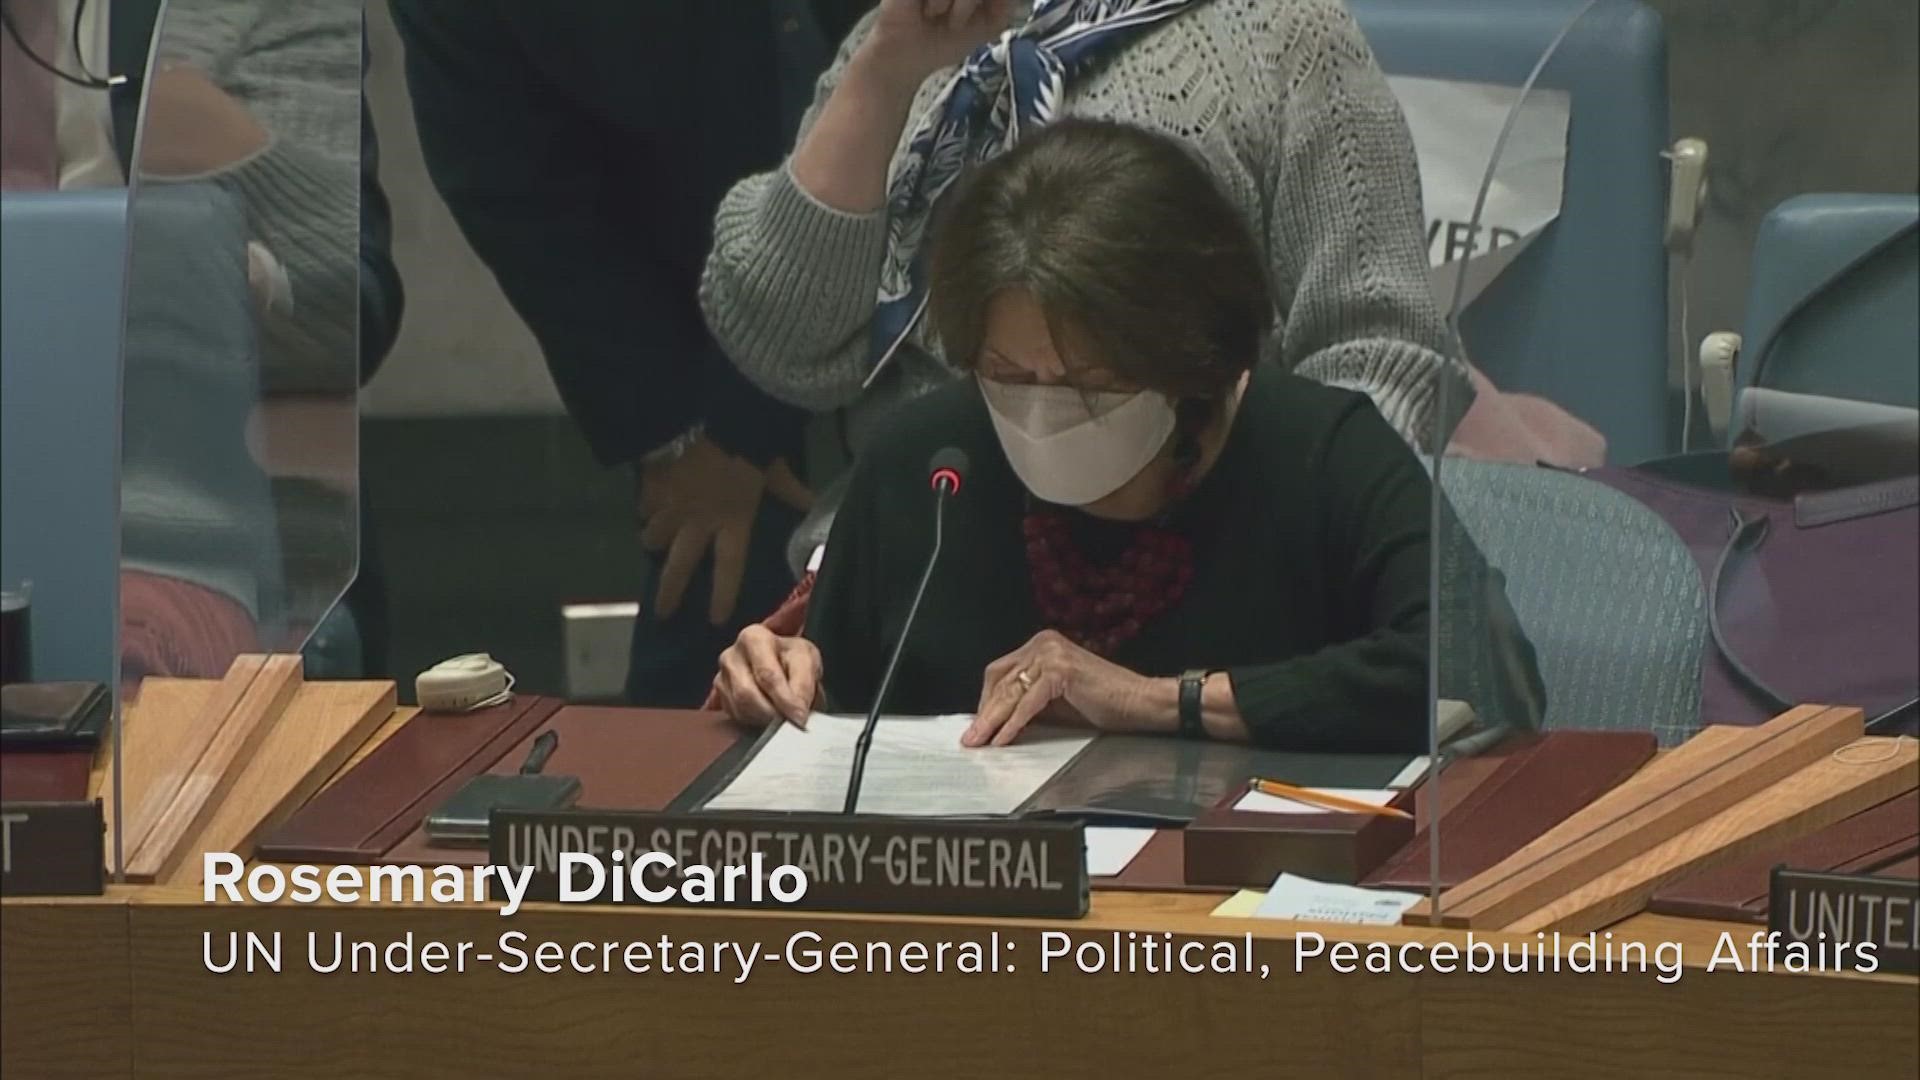 Under-Secretary-General Rosemary DiCarlo expressed deep concern at reports of civilian casualties in Ukraine during an emergency meeting of the UN Security Council.